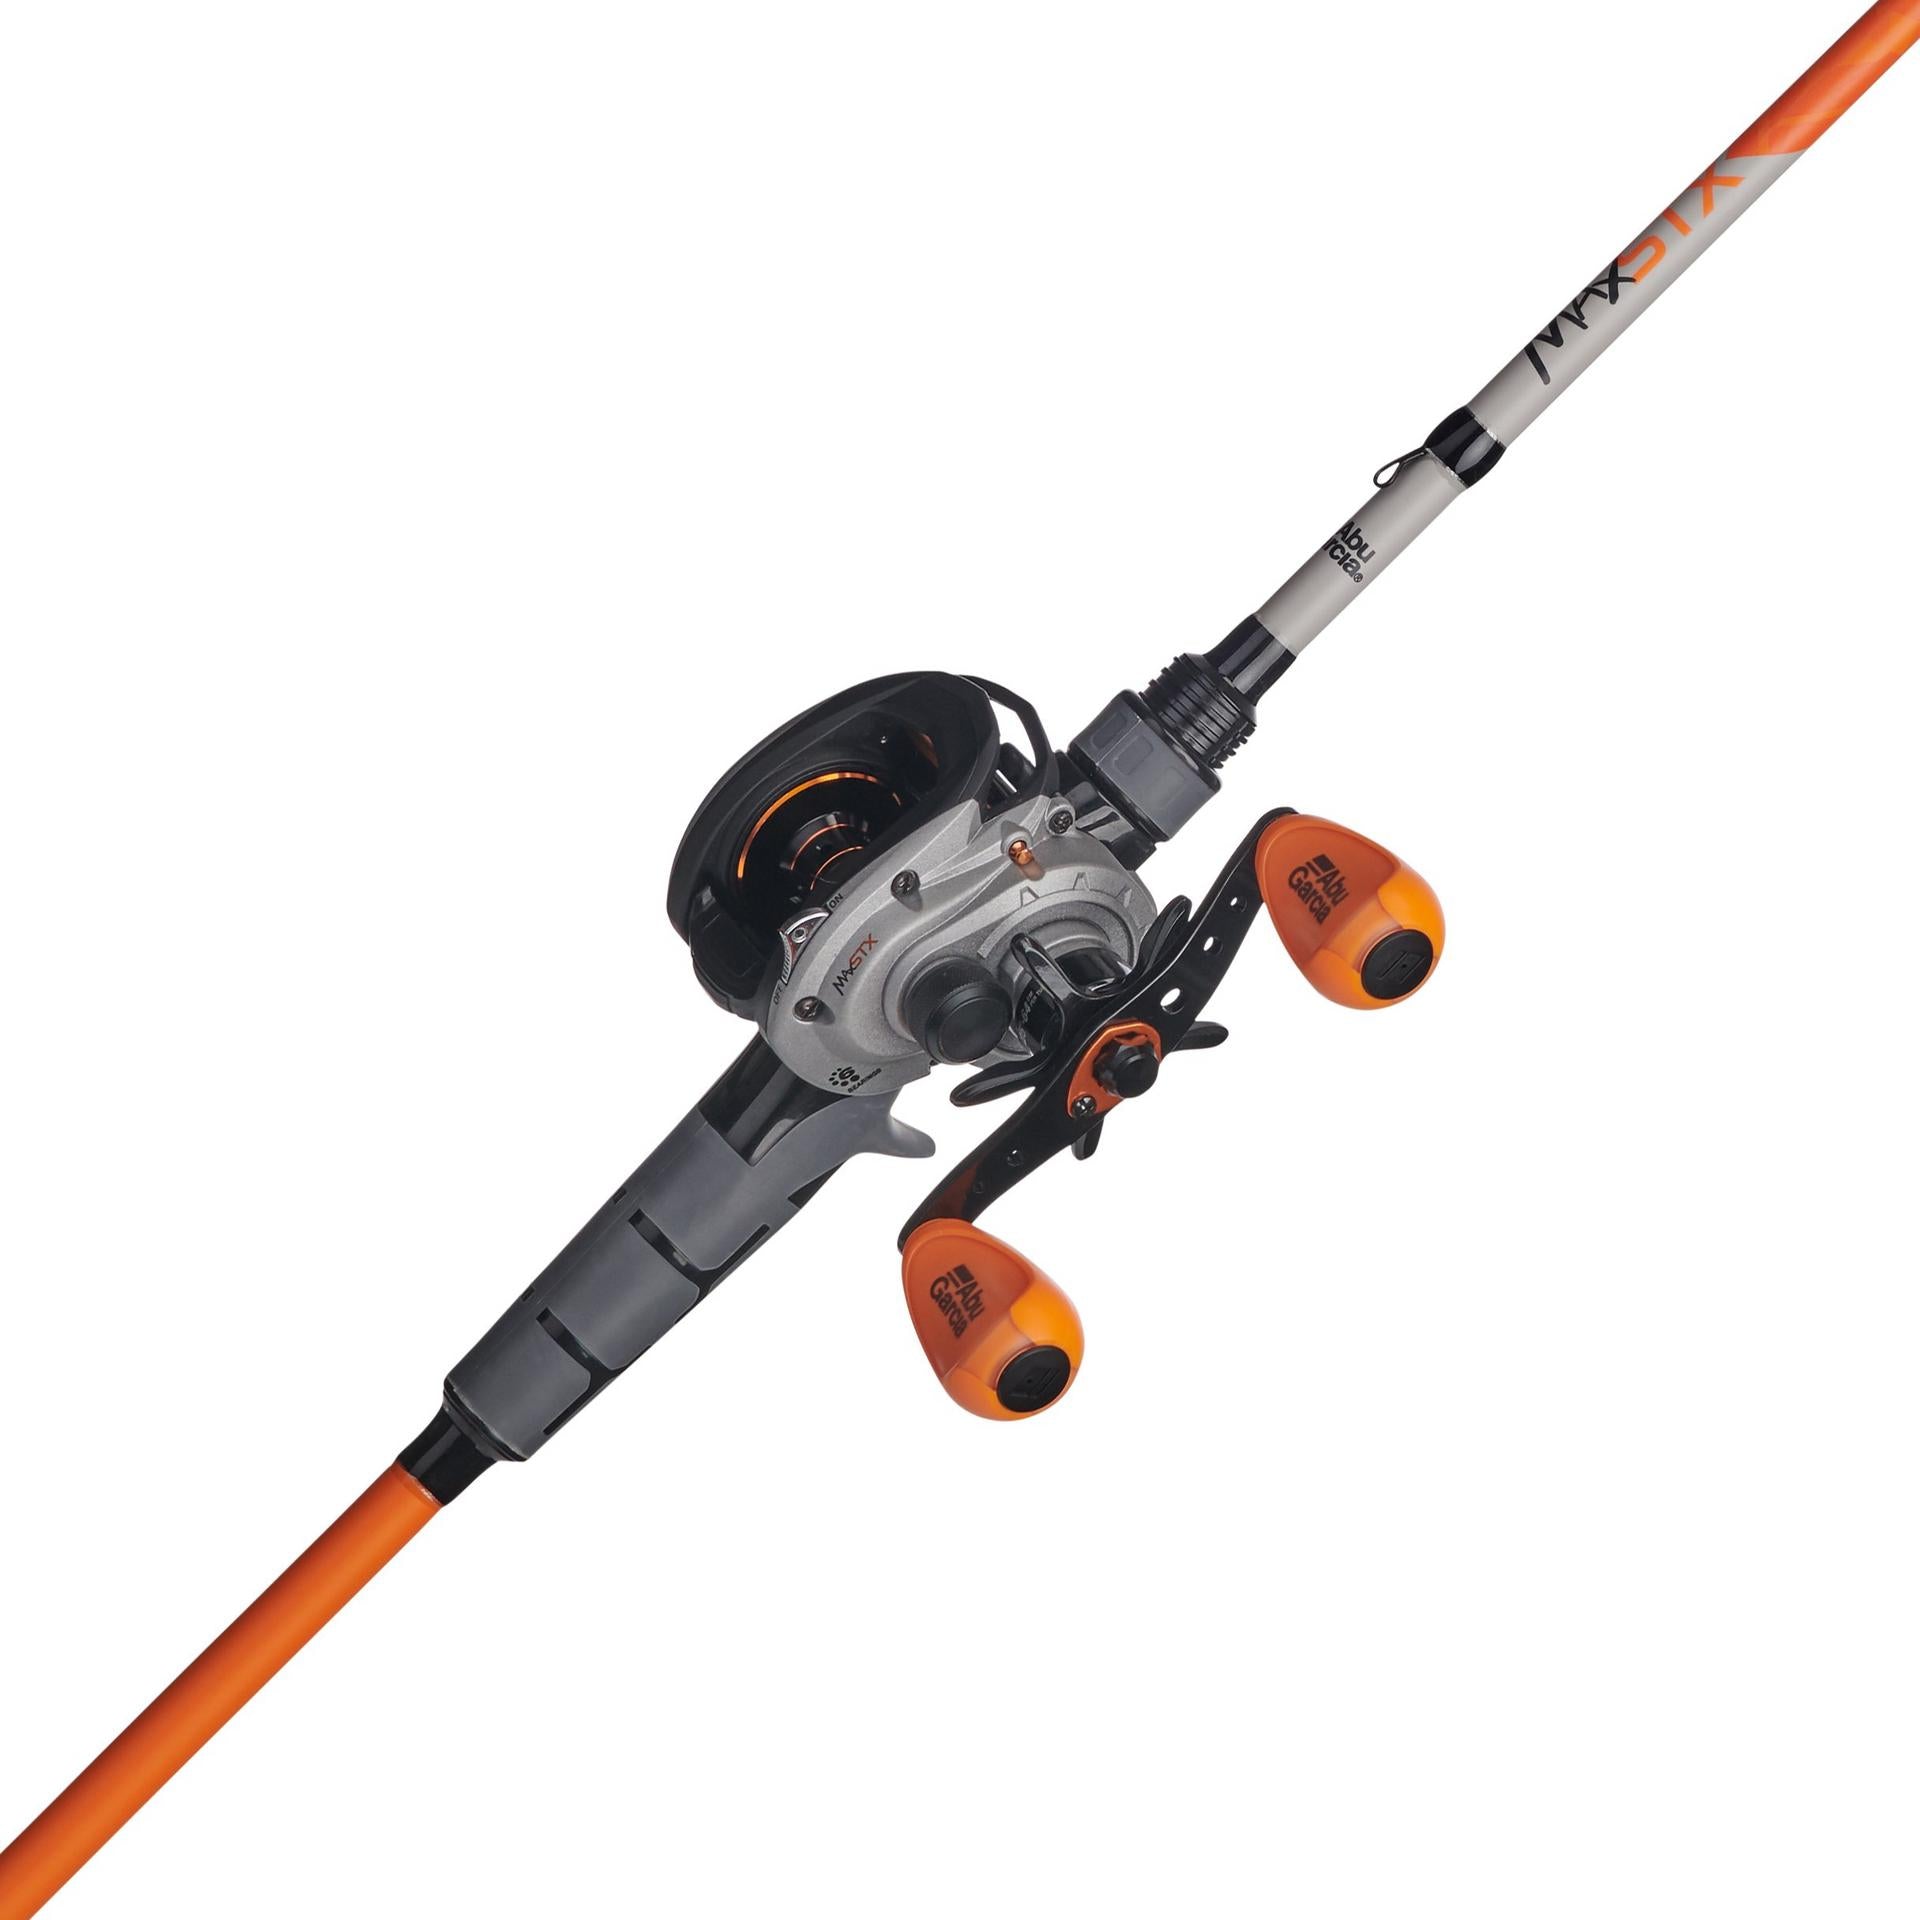 Abu Garcia Red Max Spinning Reel and Fishing Rod Combo, 7' - 1pc